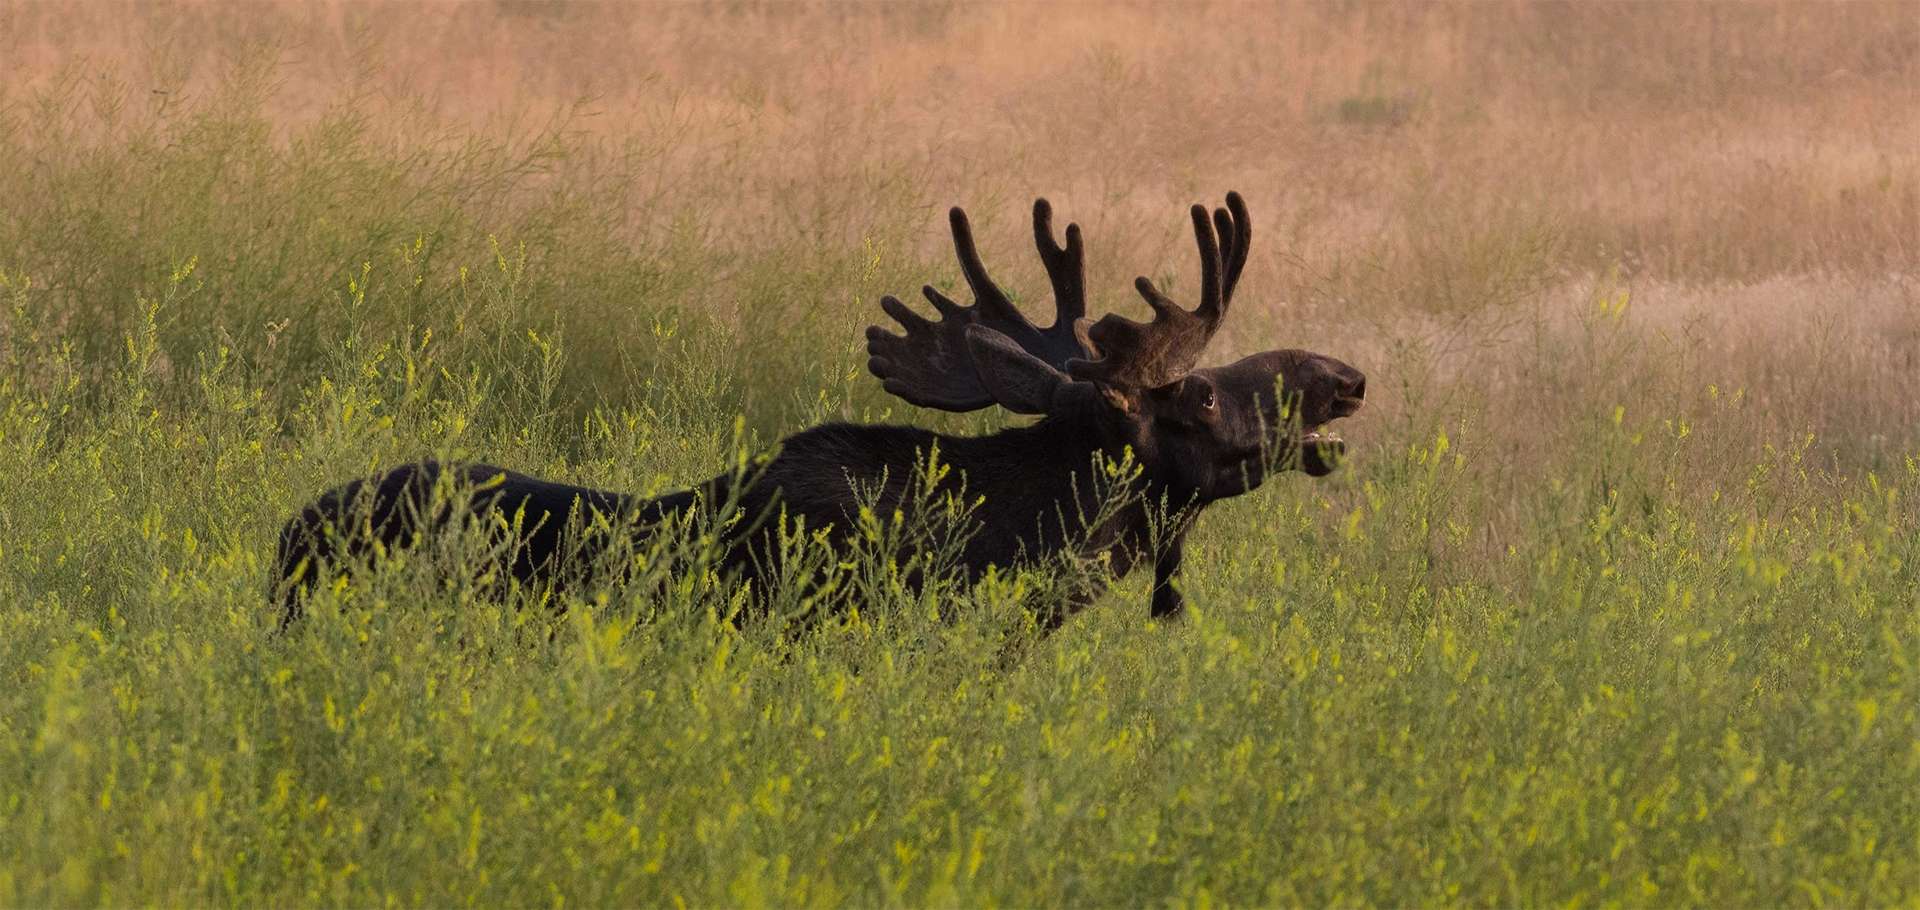 Bull moose calls out in summer field at golden hour